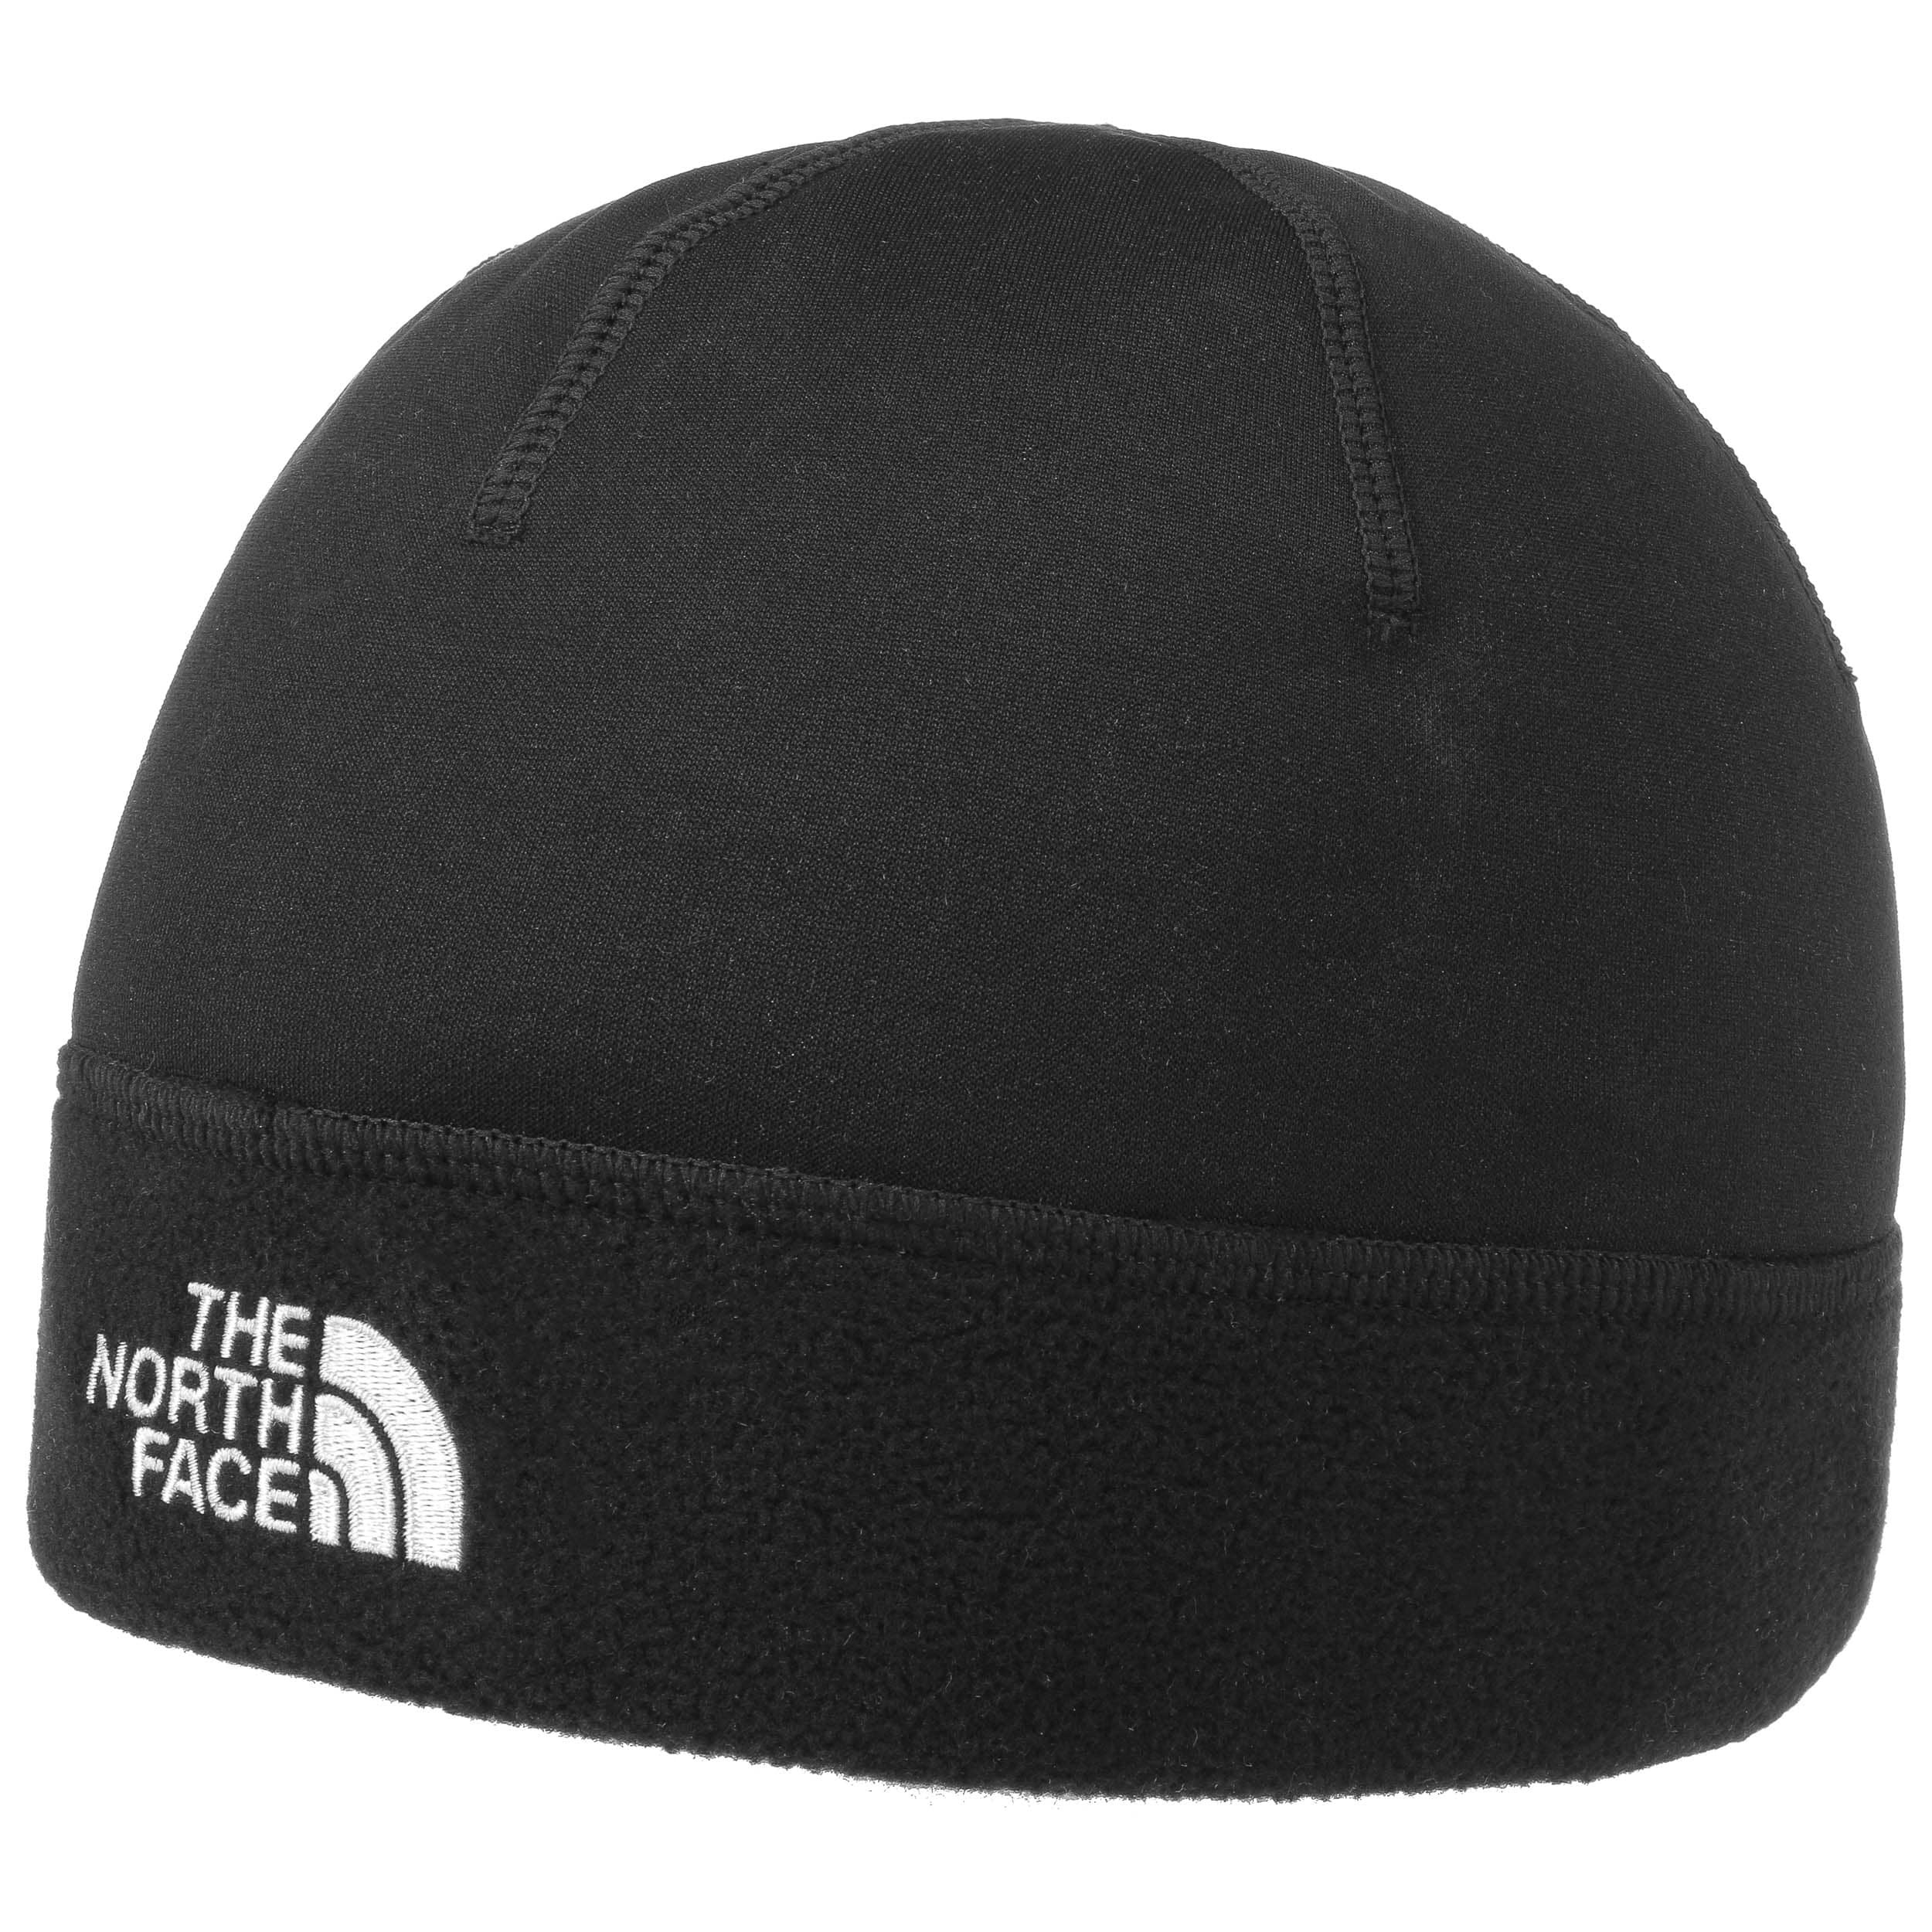 north face beanie hat